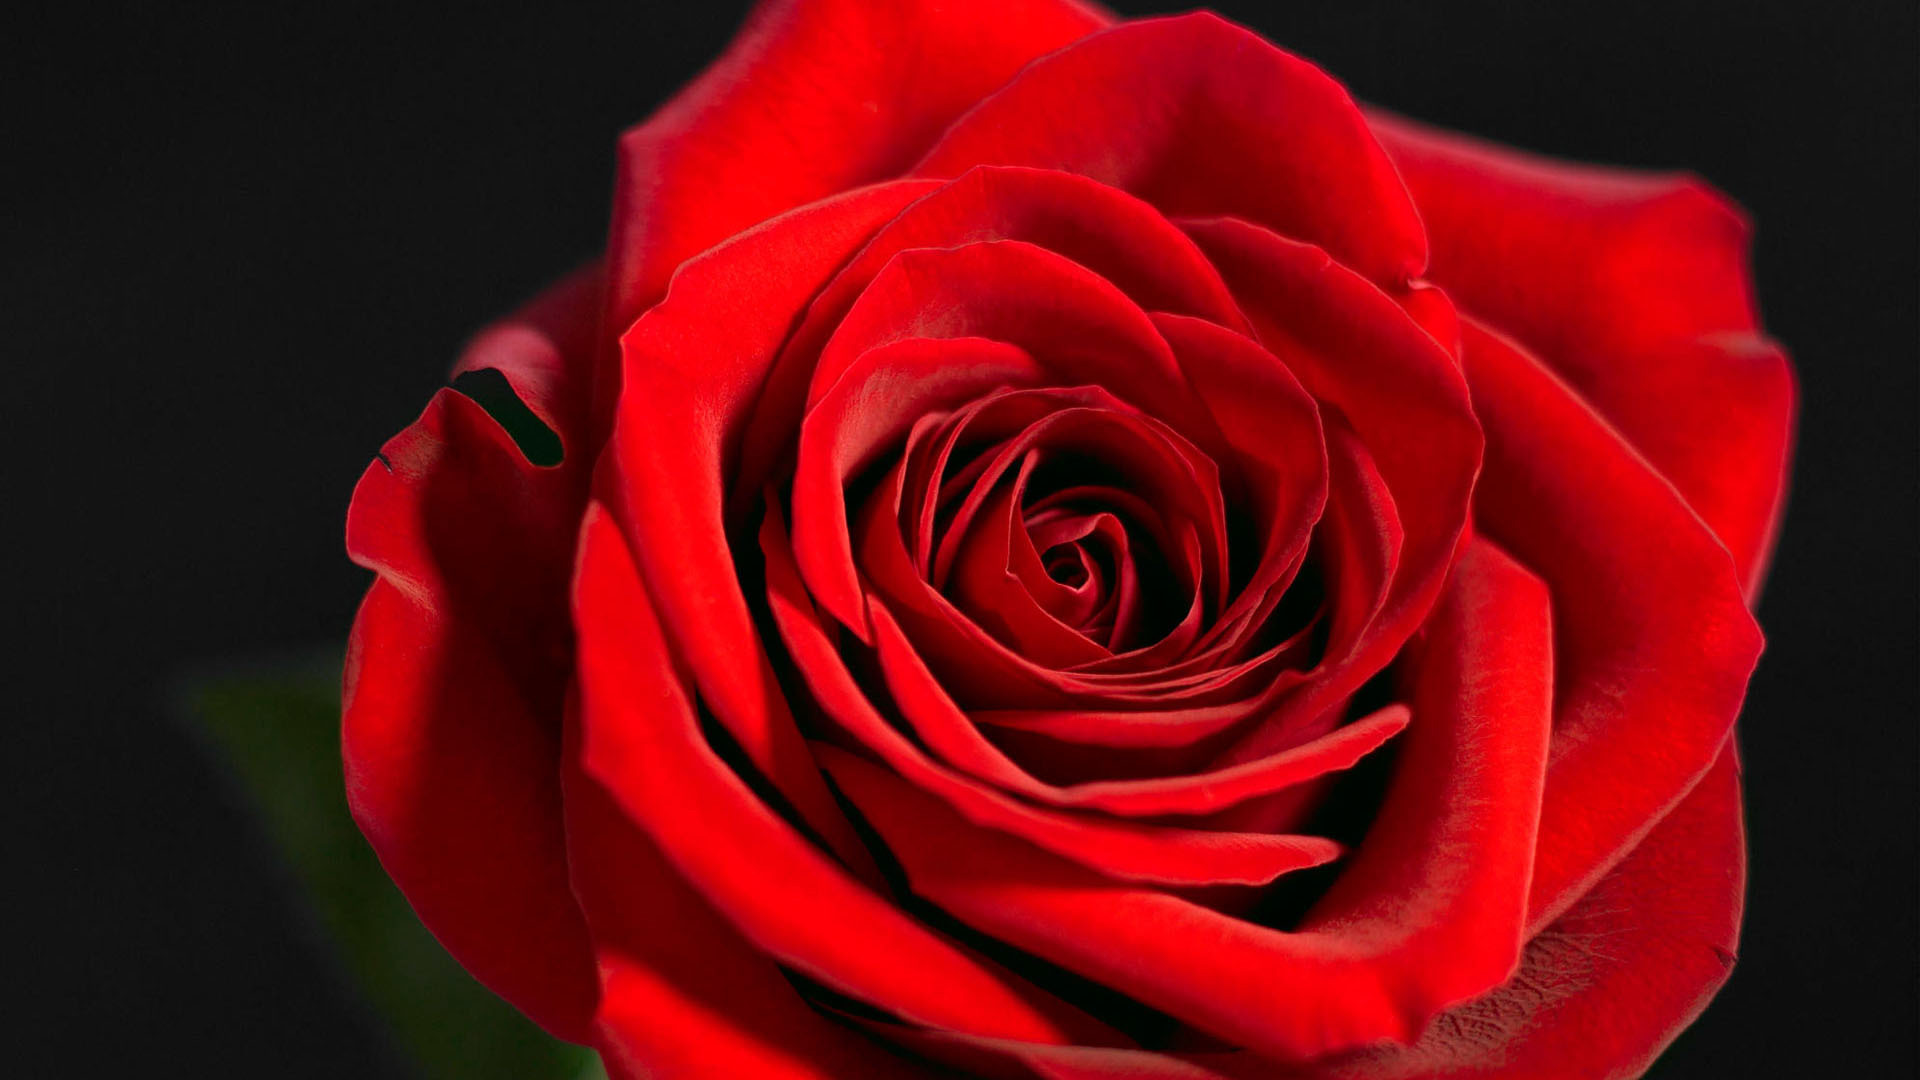 Beautiful red rose on a black background closeup wallpapers and images